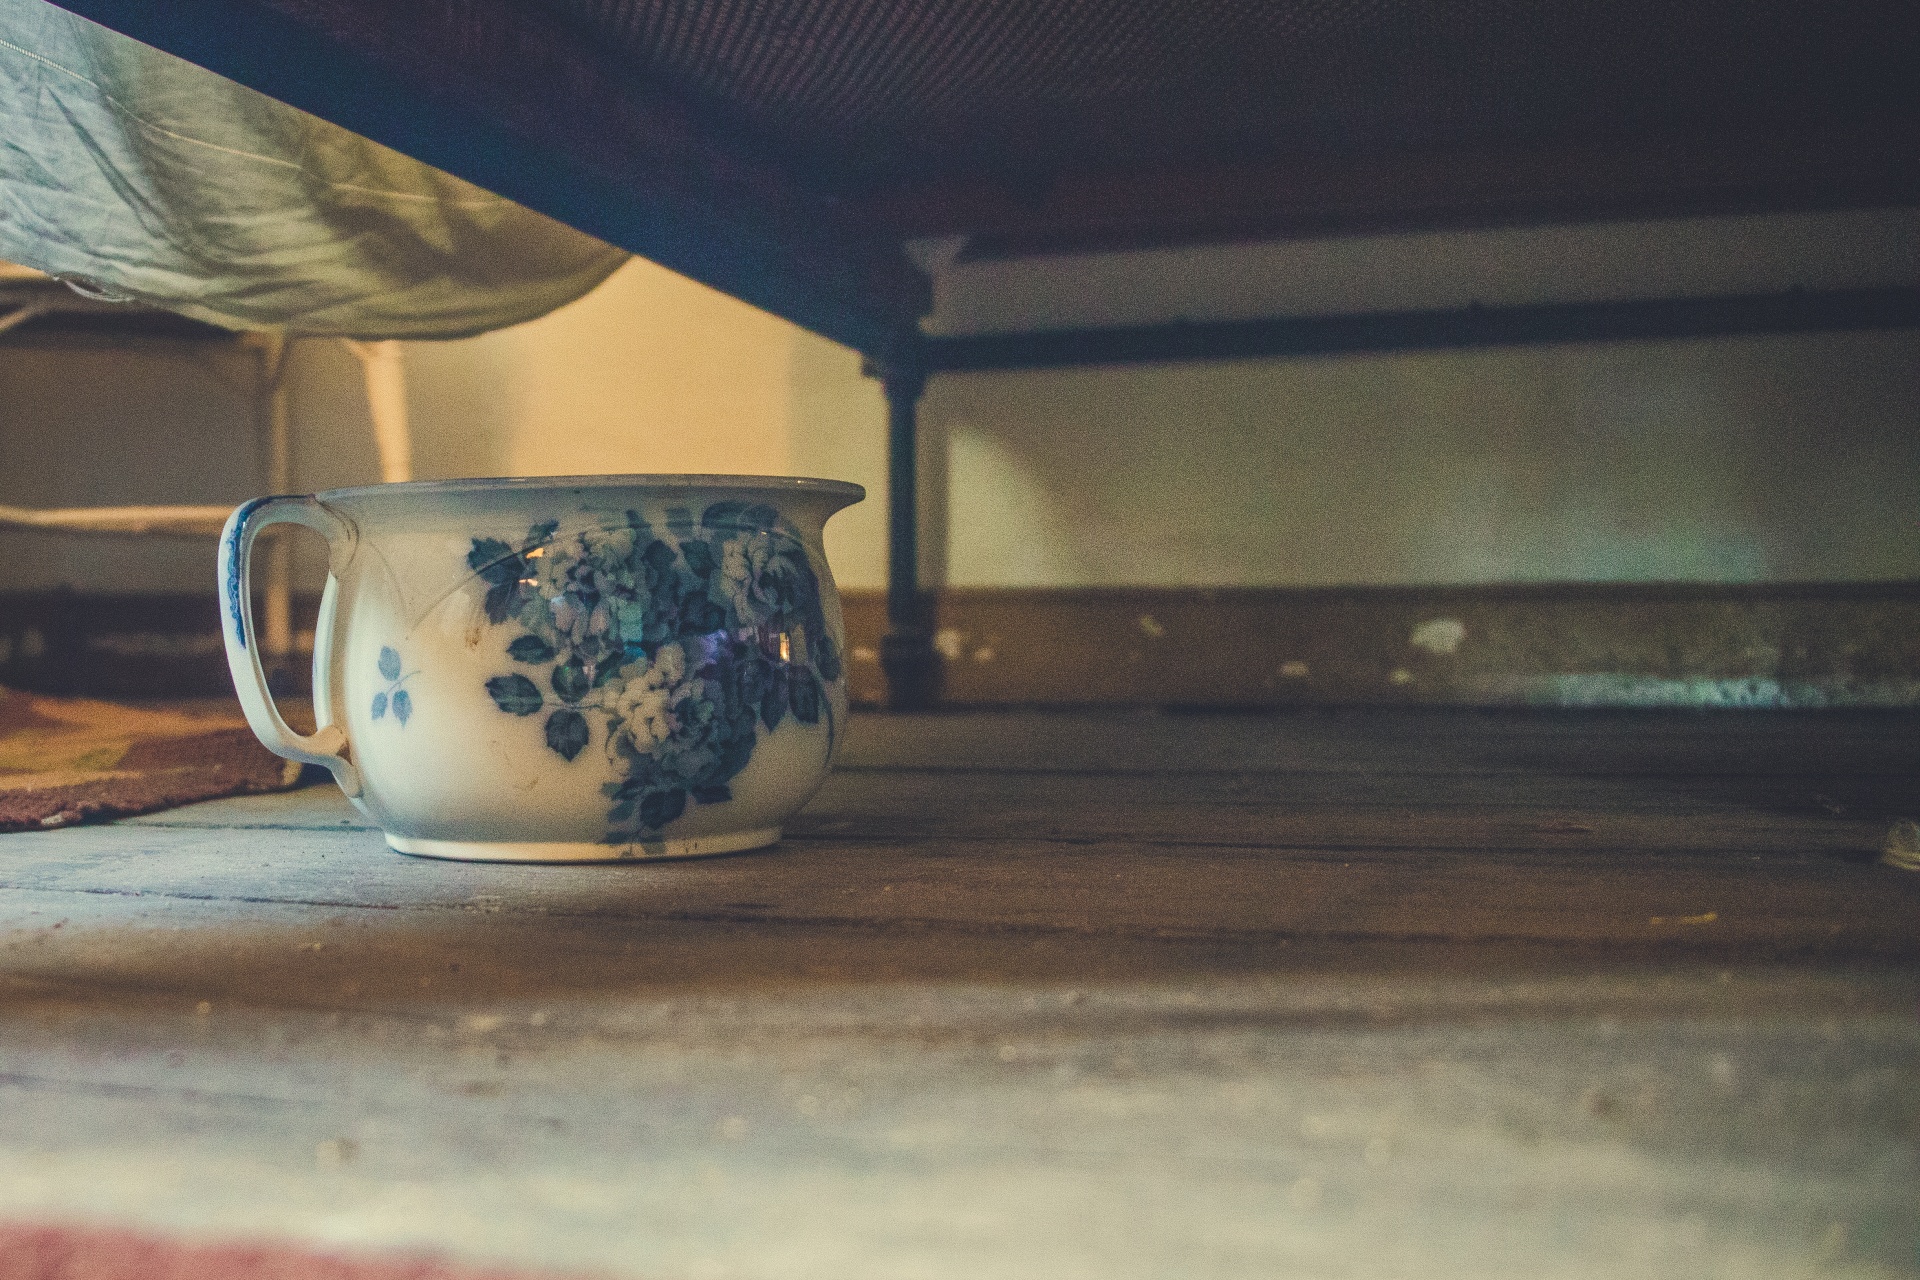 Chamber Pot Under The Bed